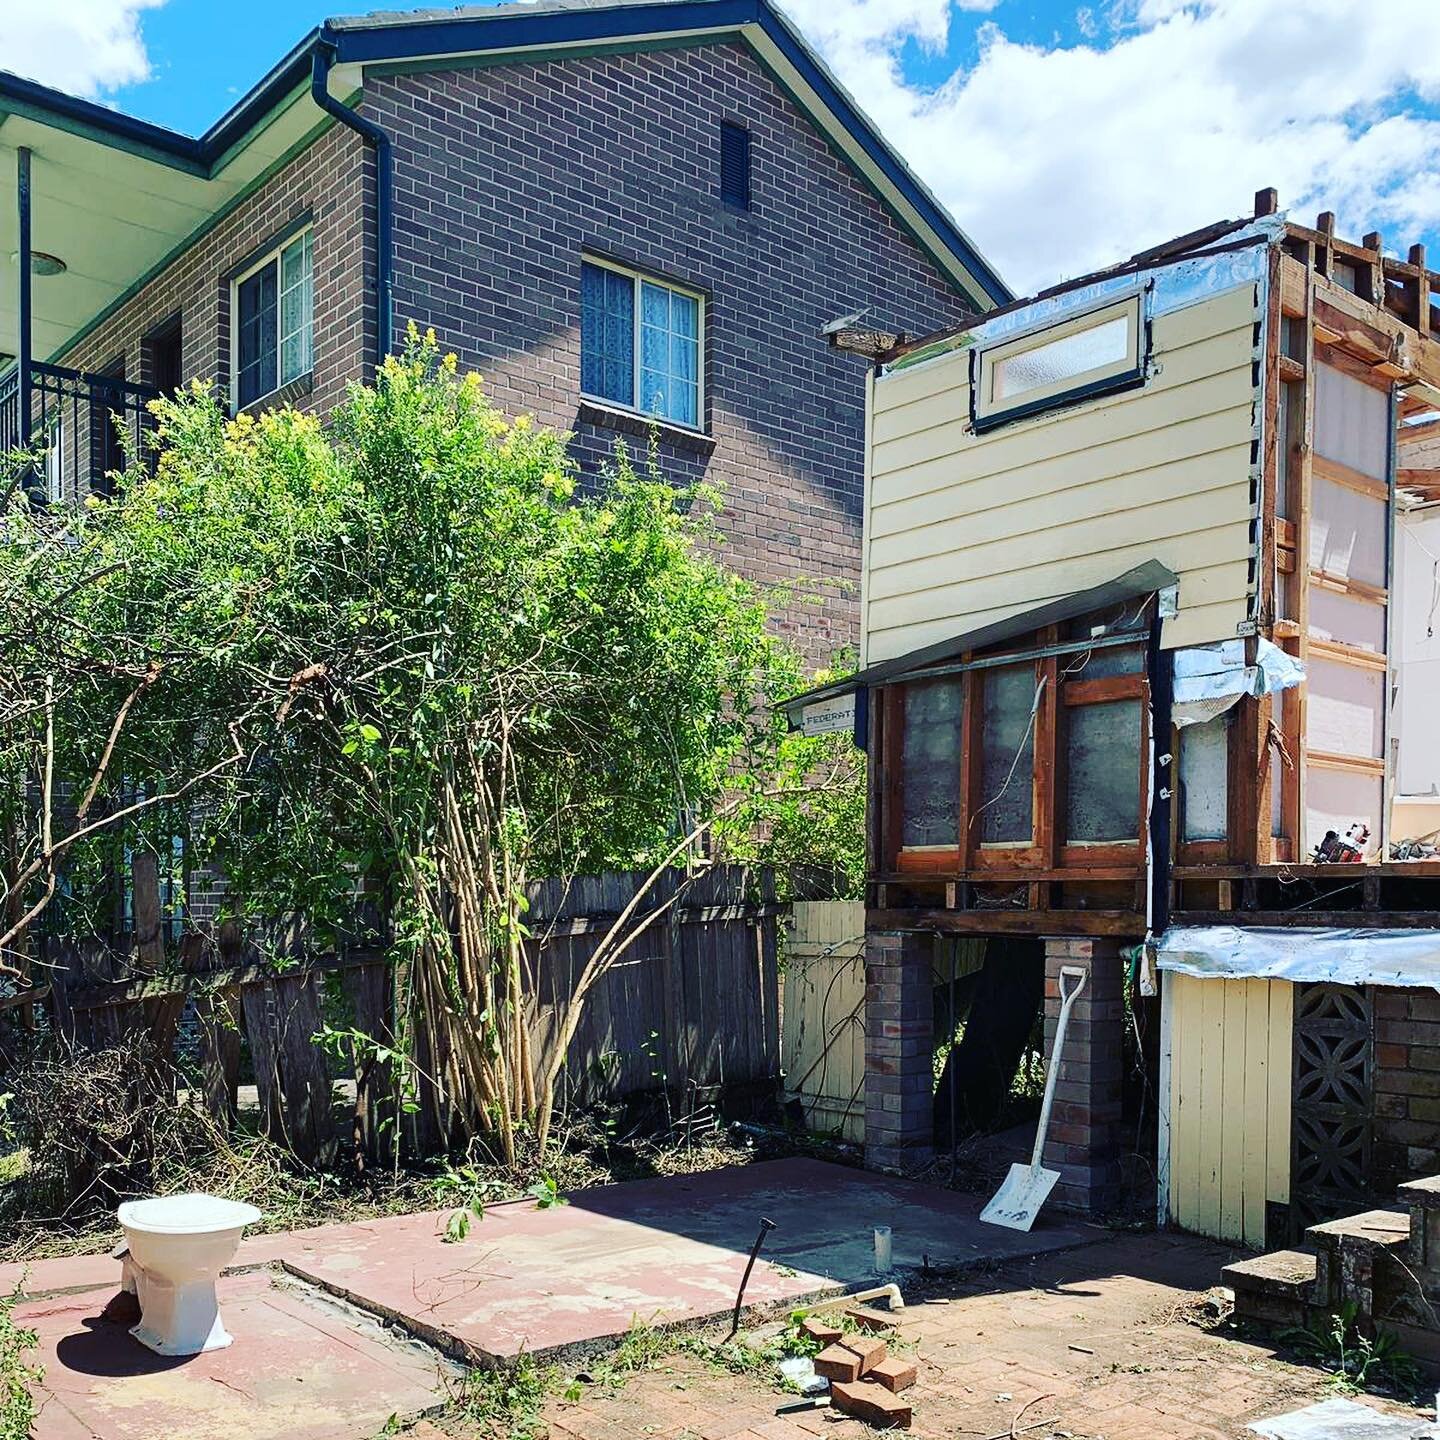 Laundry removal at our South Hurstville project. Swipe to see the before 👉👉👉
.
.
.
.
.
.
.

.

 #renovation #reno #renovationproject #renovations #garagereno #garagerenovation #homerenovations #renovationideas #garagedemolition #garagedemo #asbest